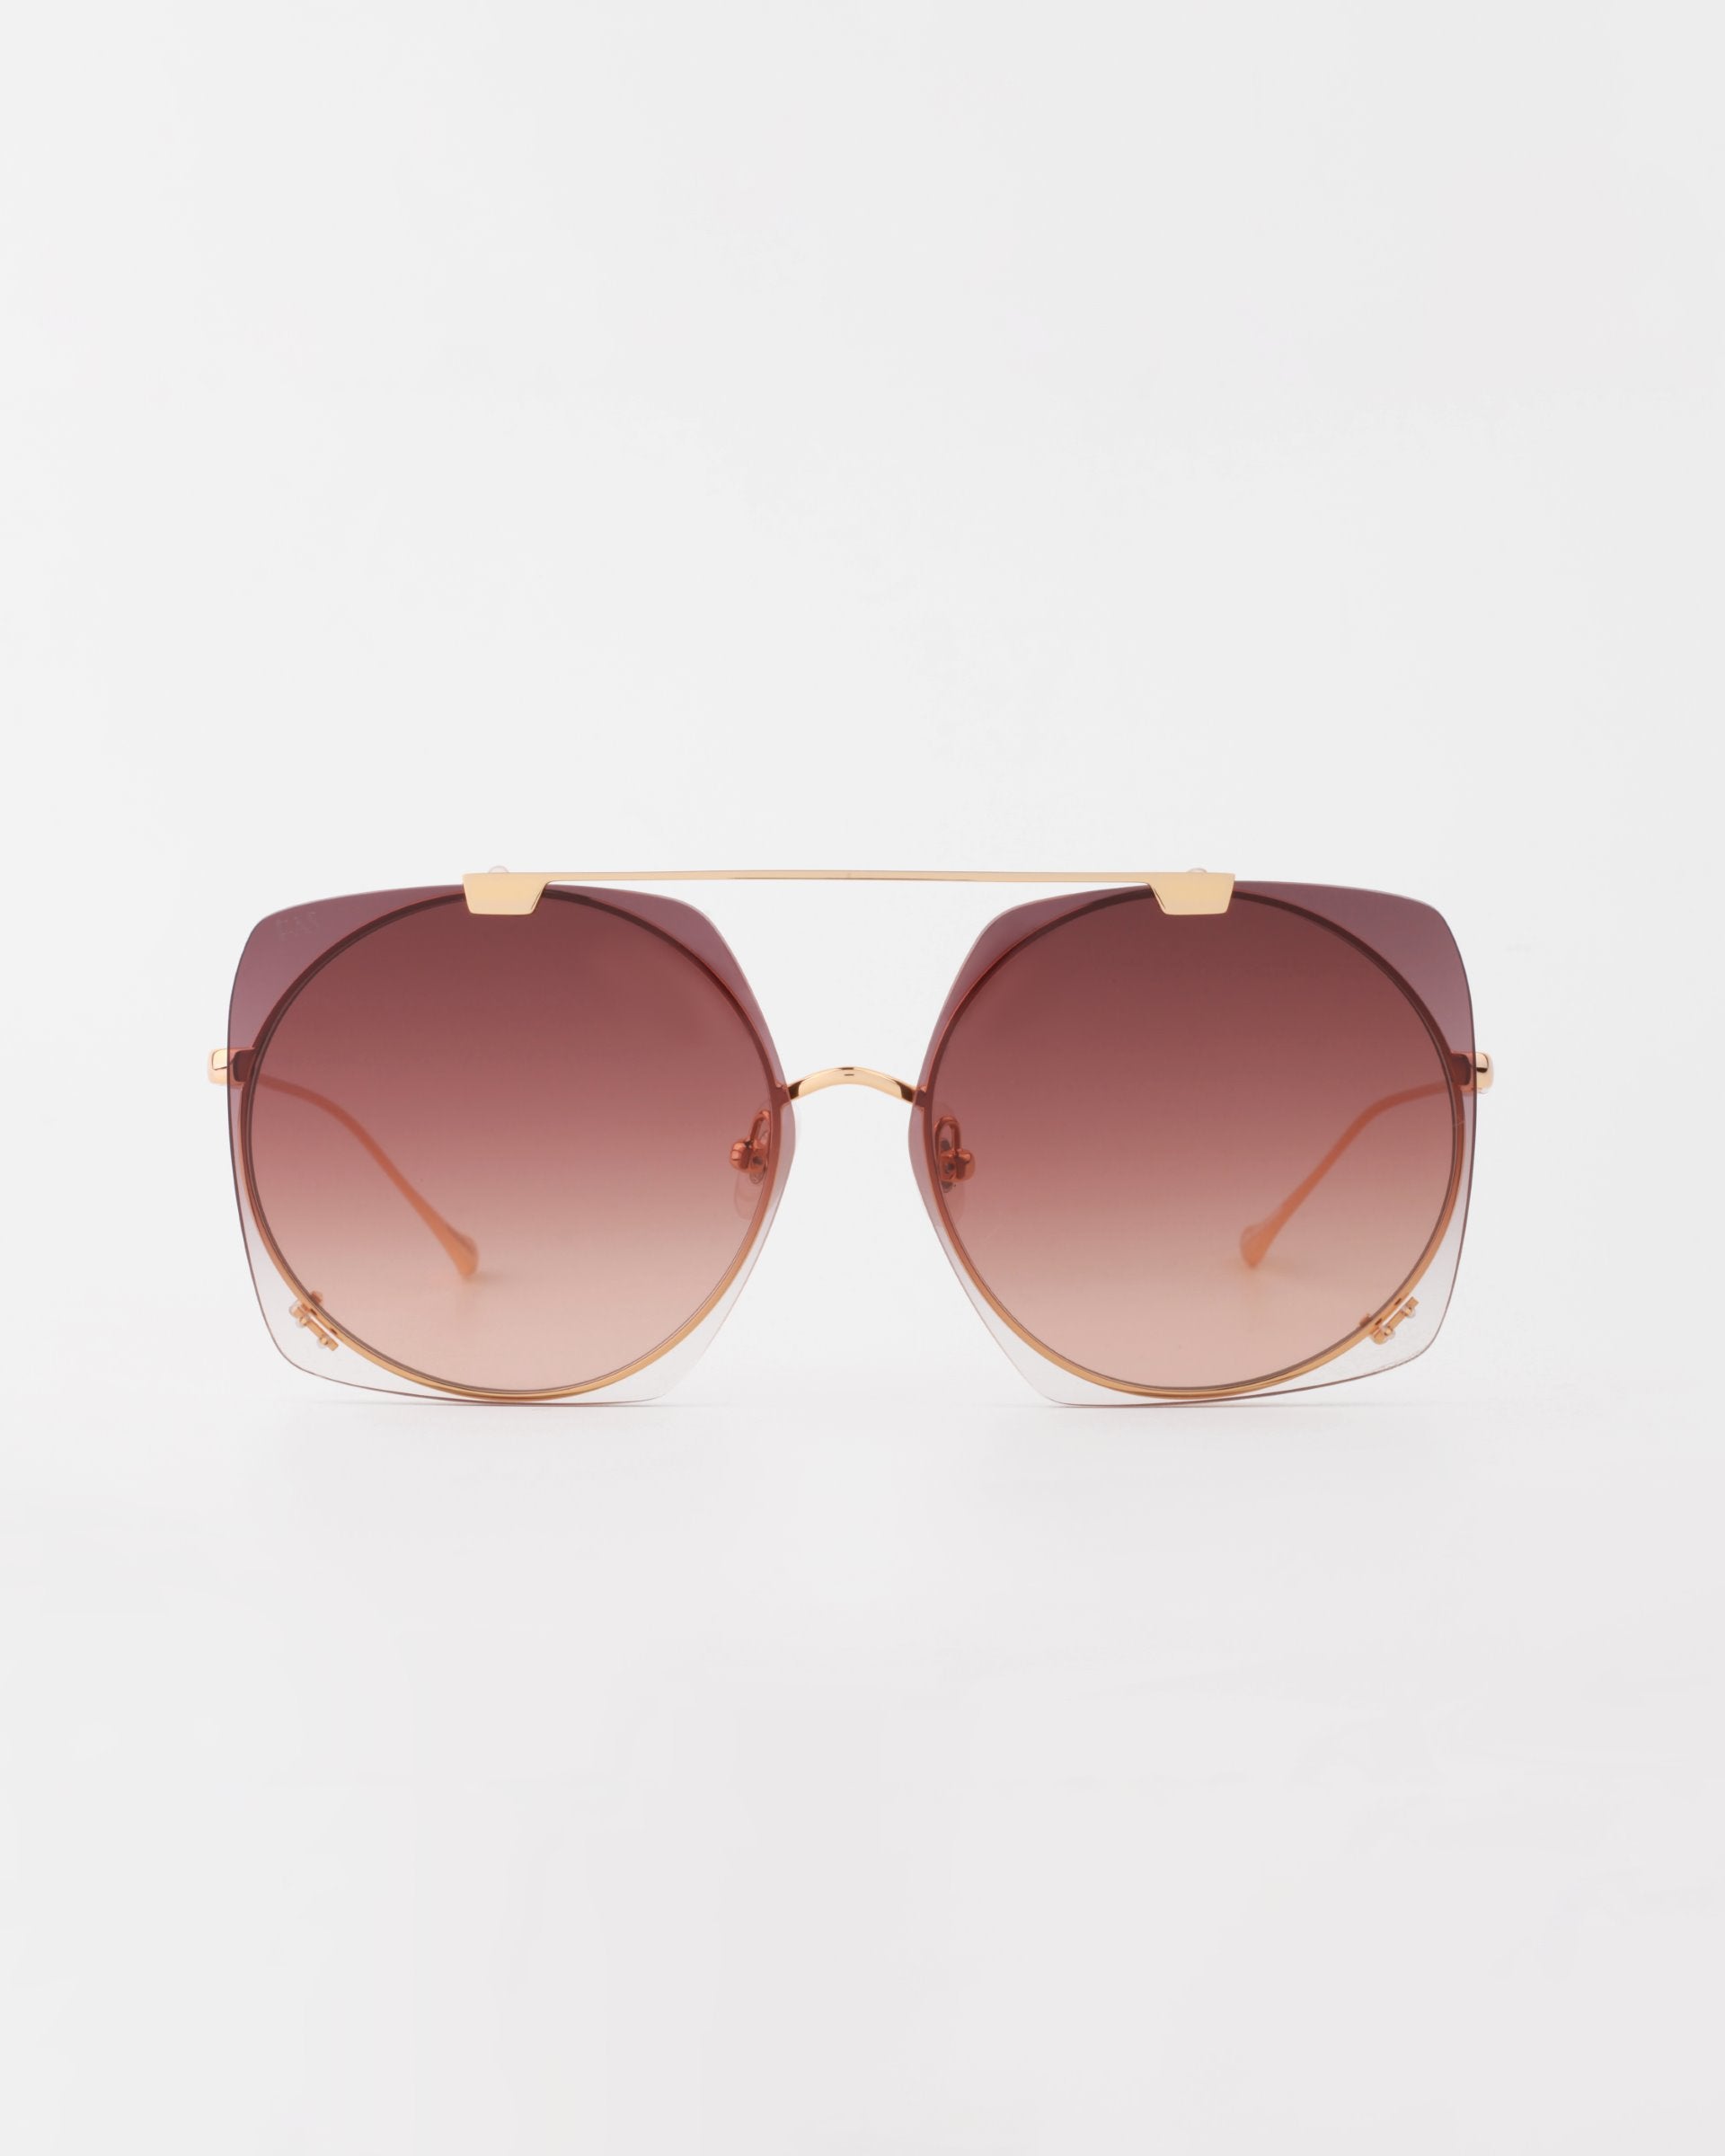 A pair of stylish sunglasses with oversized, round gradient lenses that transition from dark burgundy at the top to lighter at the bottom. The 18-karat gold-plated metal frame includes a thin bar across the top connecting the two sides, and the UVA & UVB-protected lenses are slightly angular. For Art's Sake® Last Summer.